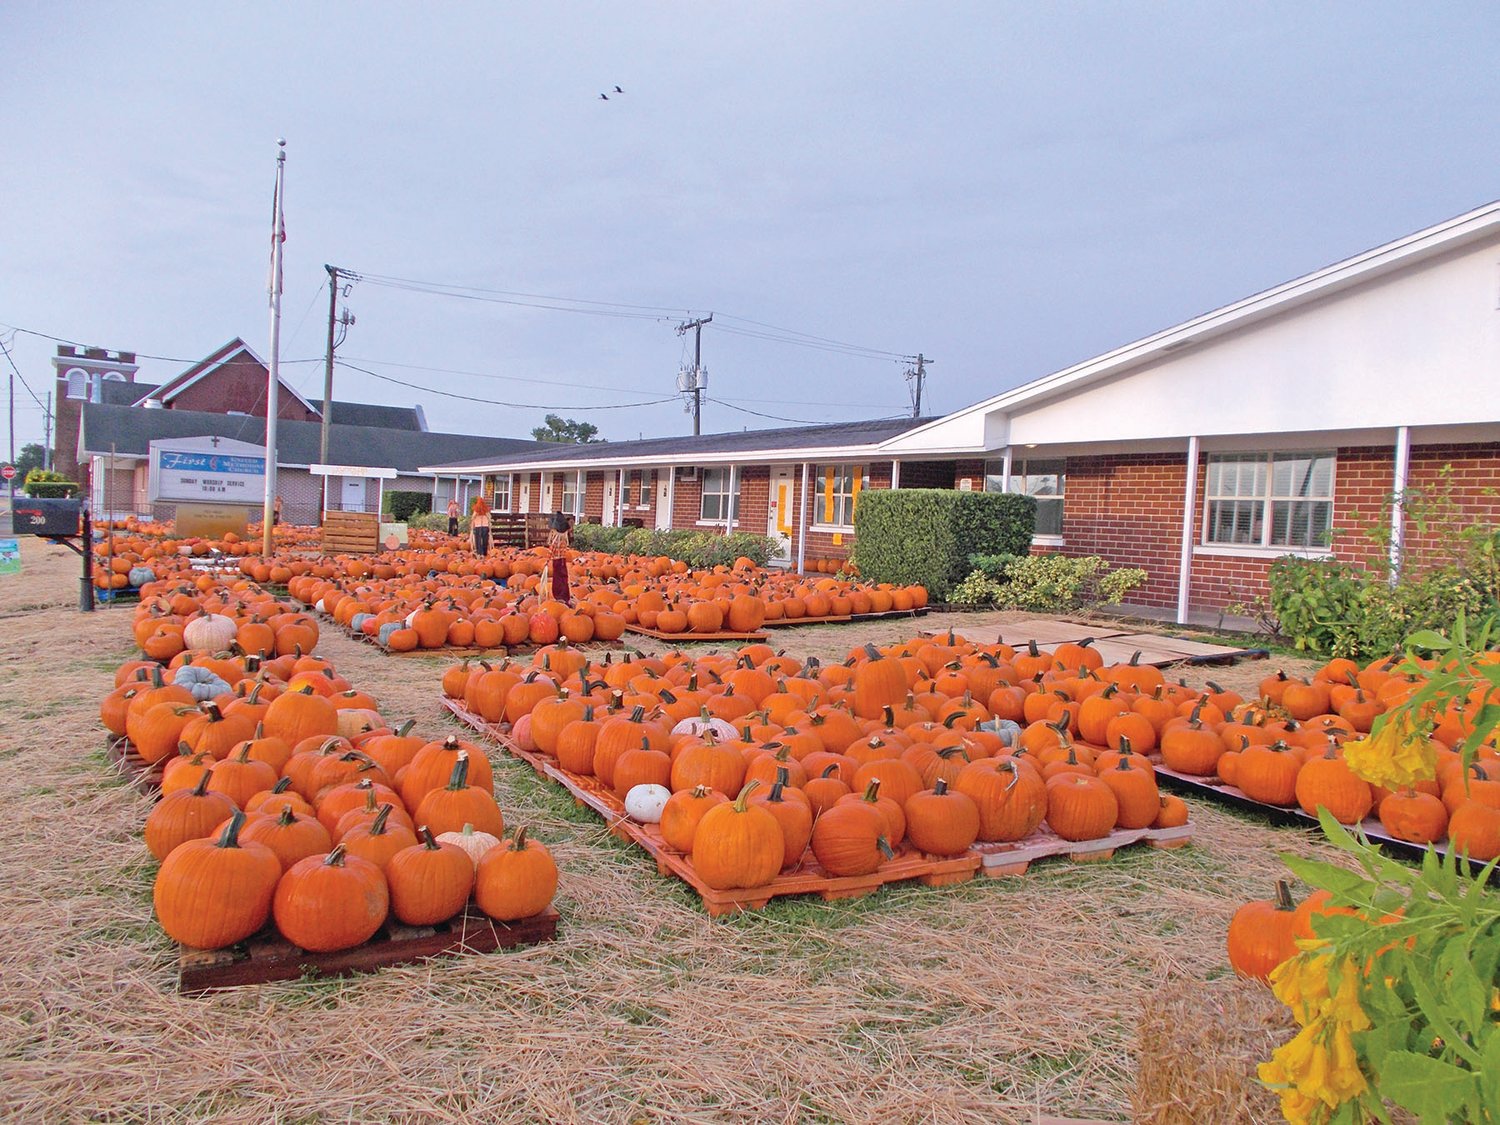 OKEECHOBEE — The pumpkin patch operates on the honor system. Prices for various sizes of pumpkins are posted. Choose your pumpkin and pay in the office if the church is open. If the office is closed, leave the money for the pumpkin in the drop slot.